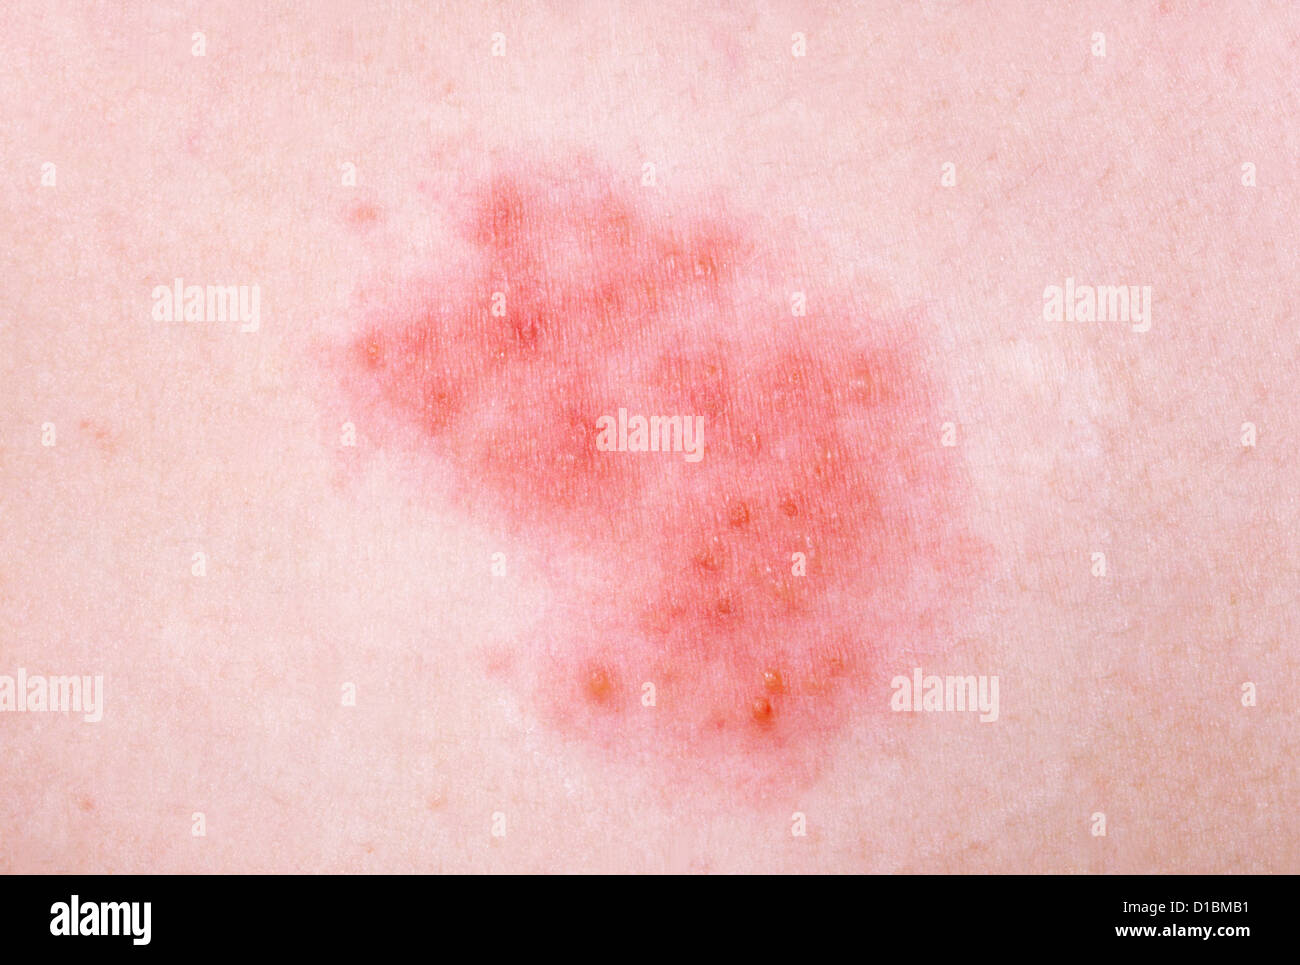 HERPES ZOSTER Foto Stock